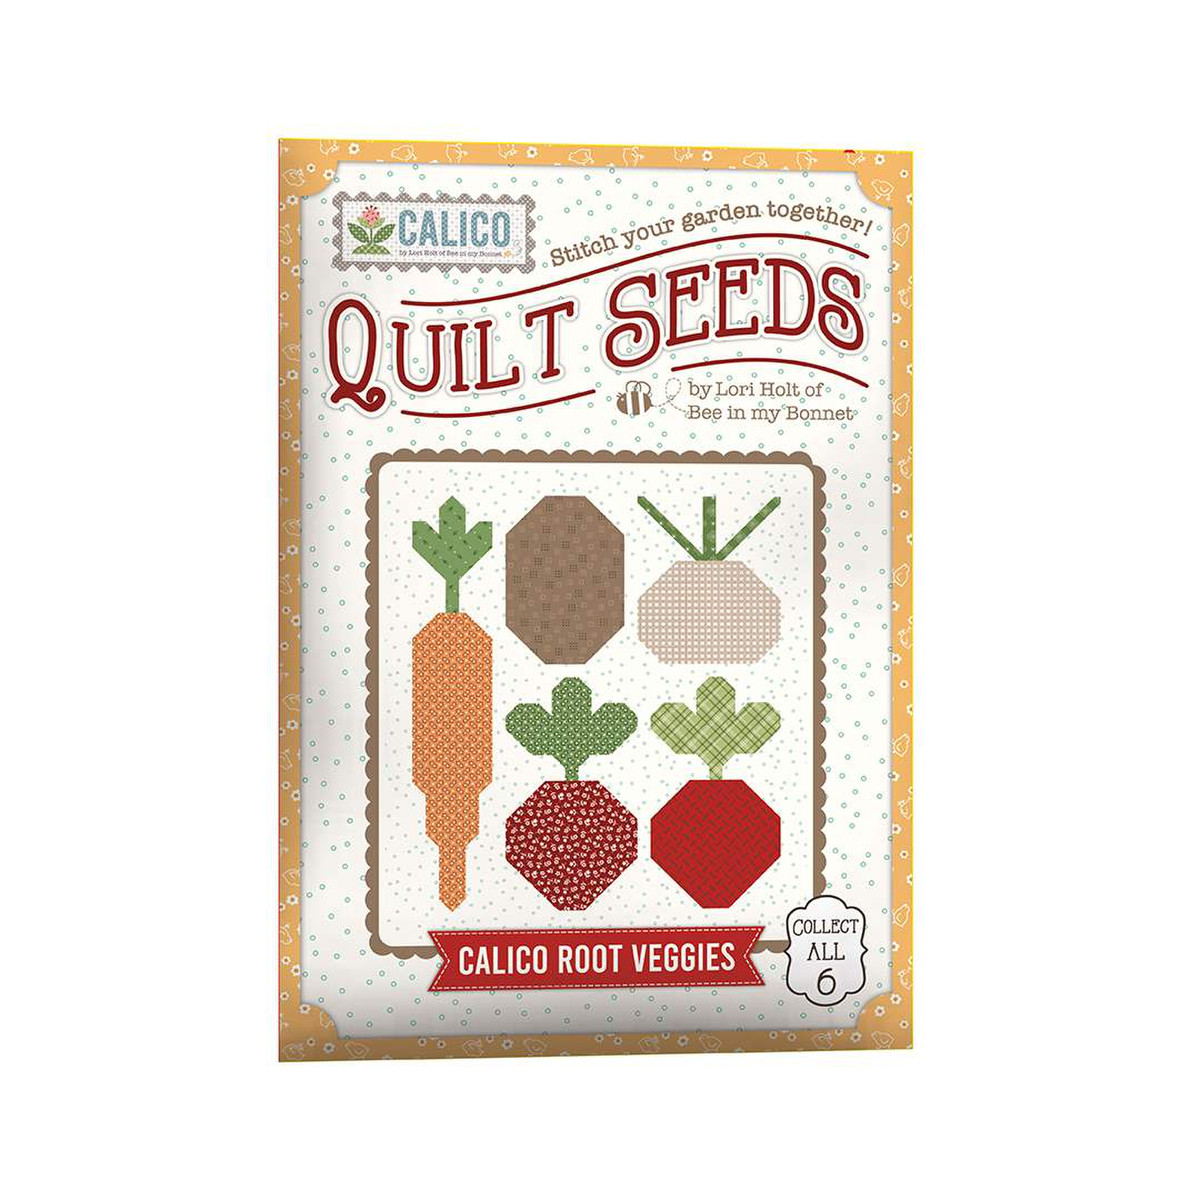 CALICO ROOT VEGGIES QUILTS SEEDS Pattern by LORI HOLT